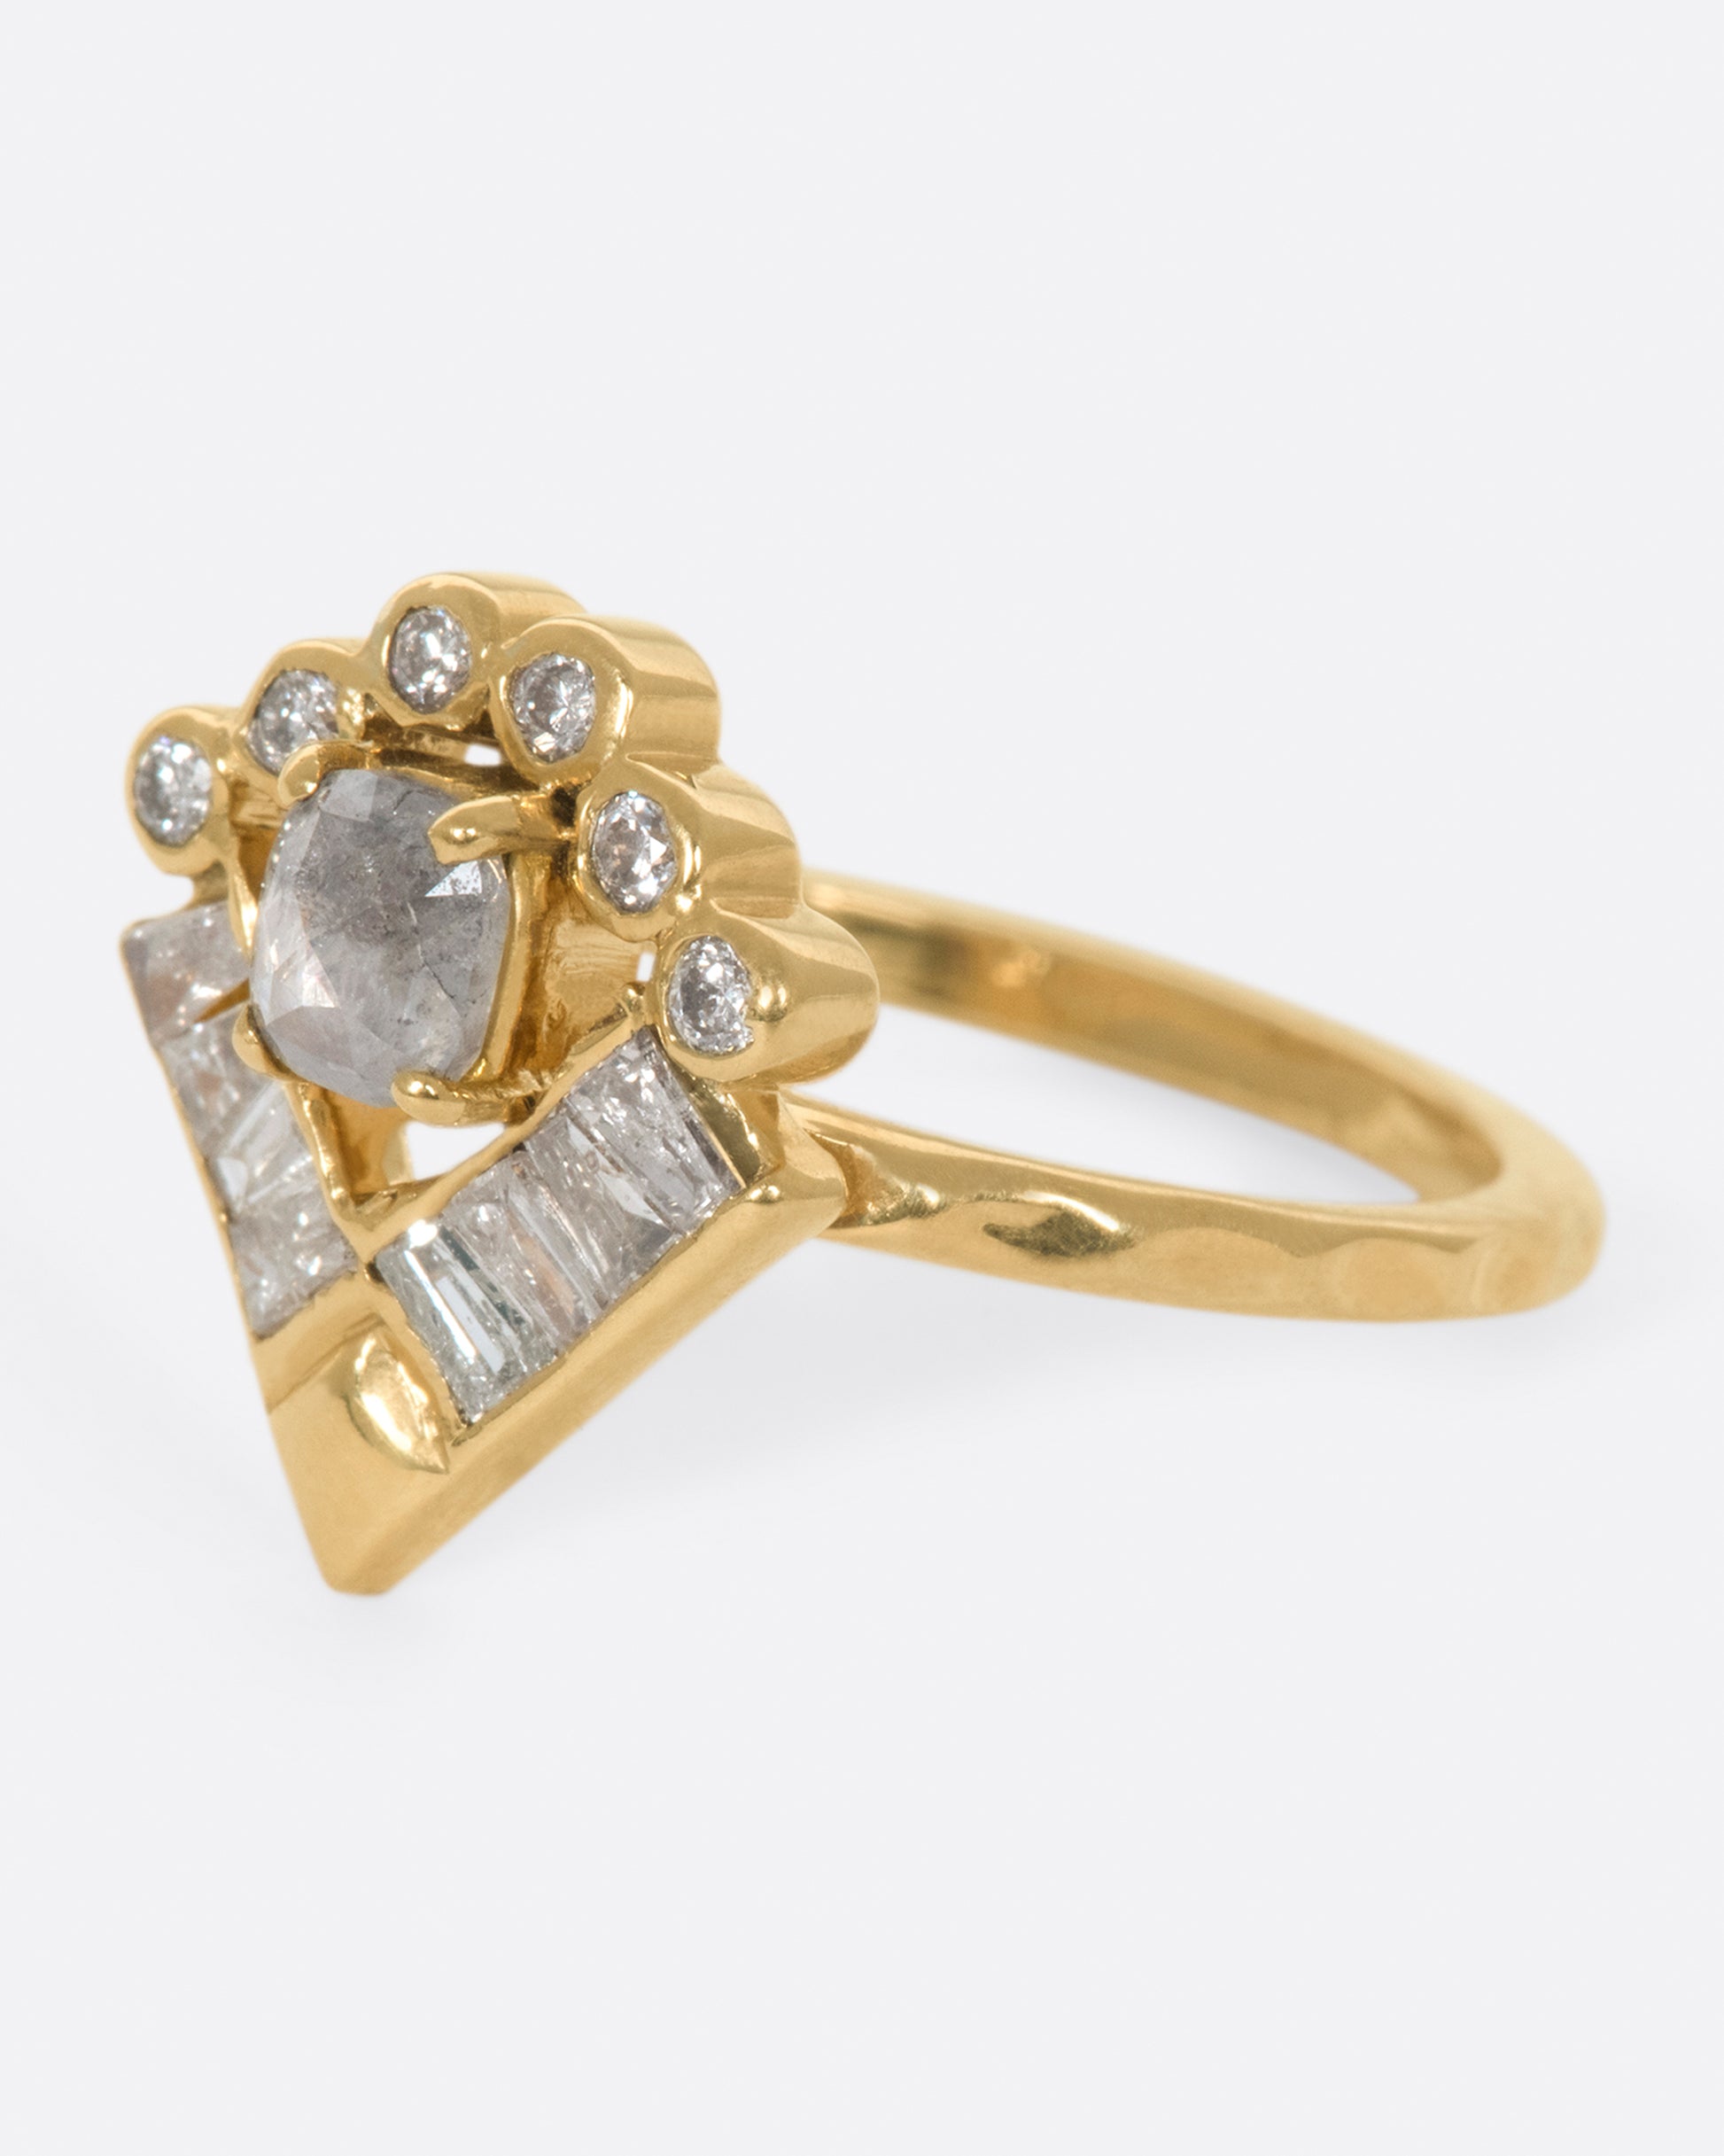 A ring that encompasses a little bit of everything; geometry, a halo, a textured band, round and baguette diamonds, and an oval rose cut salt & pepper diamond at its center.